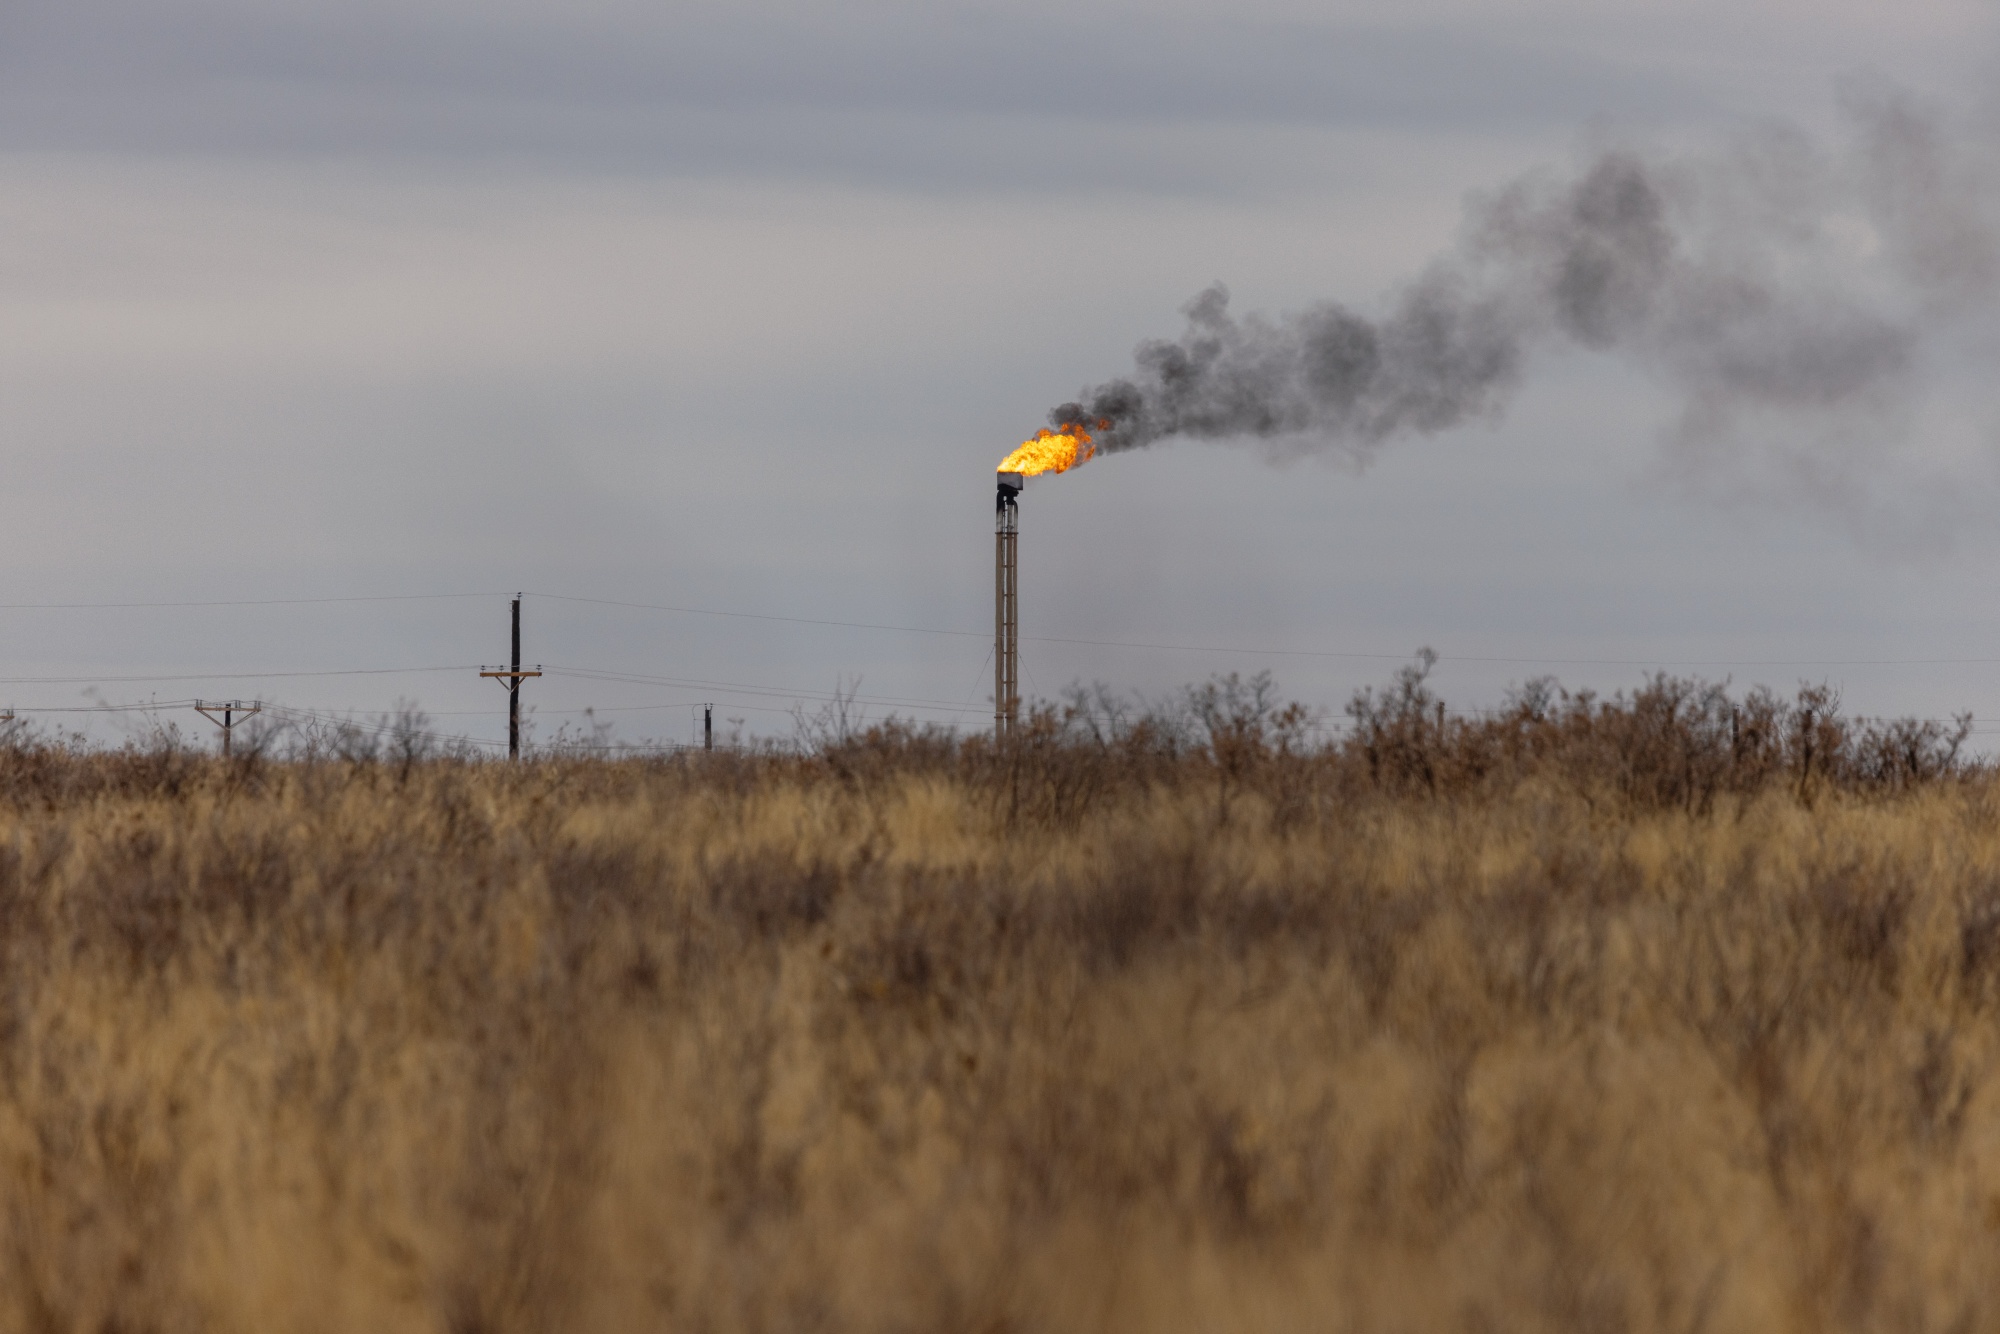 A natural gas flare stack at an oil well in Midland, Texas.